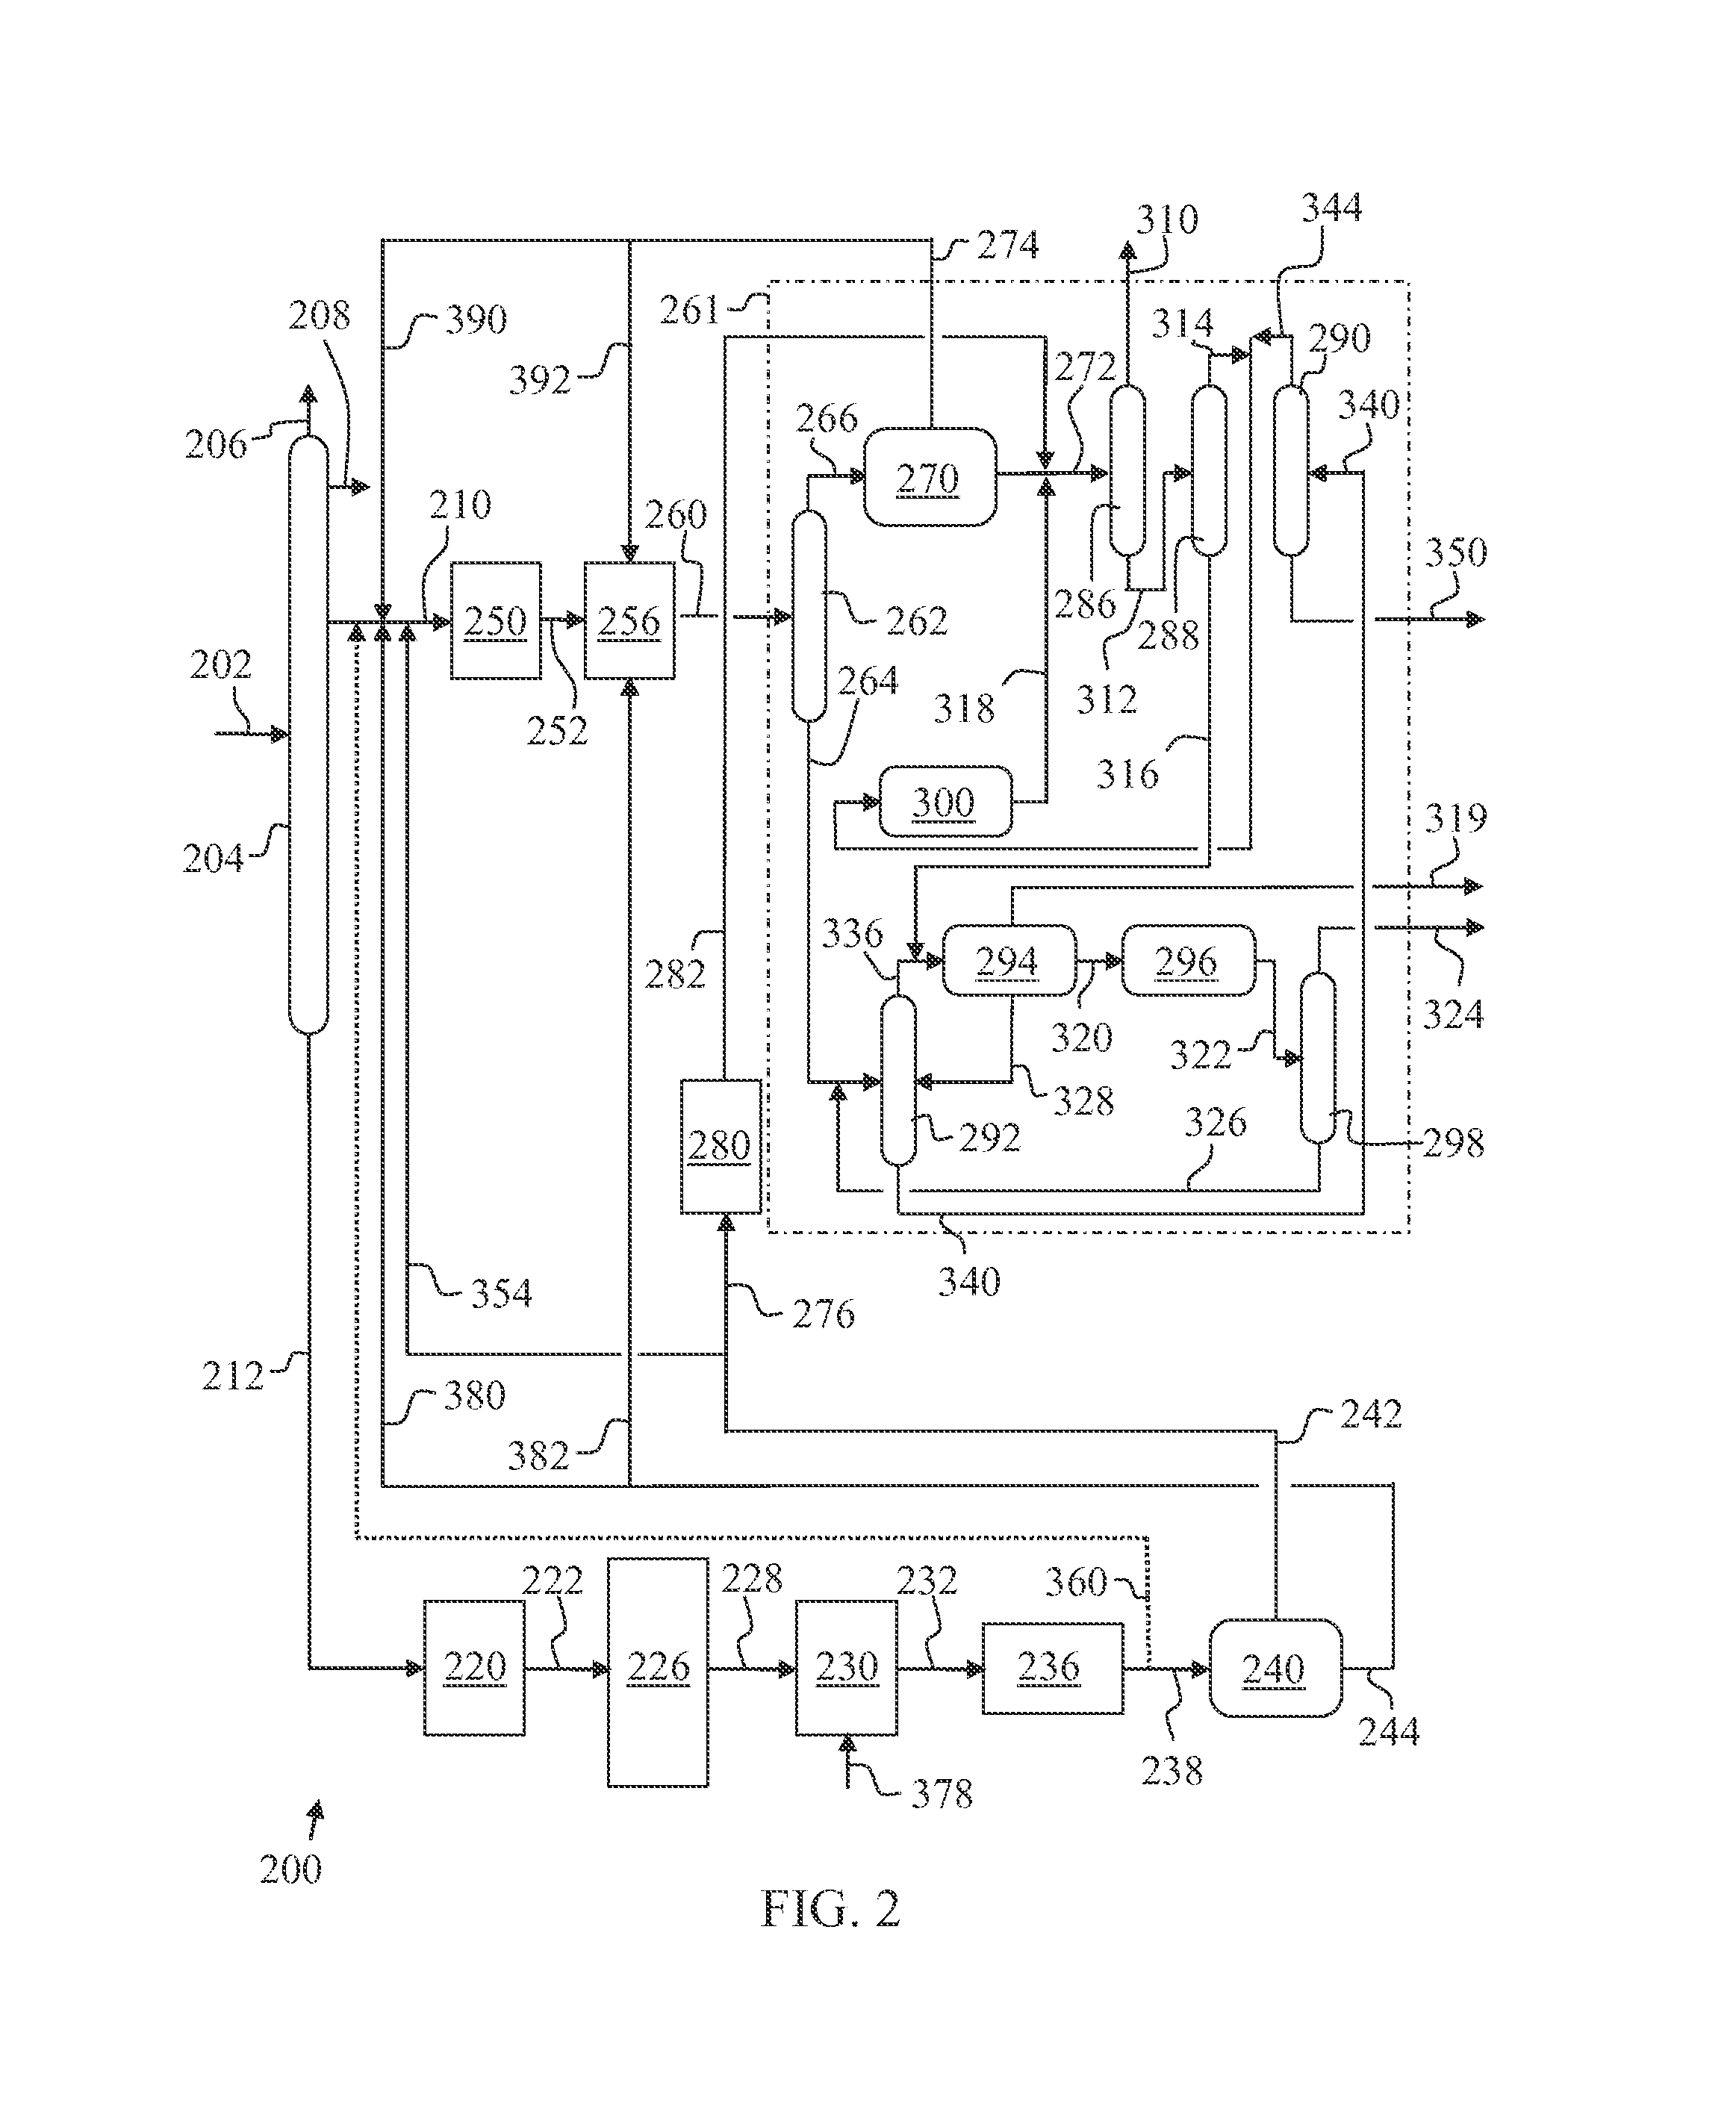 Methods and apparatuses for processing hydrocarbons